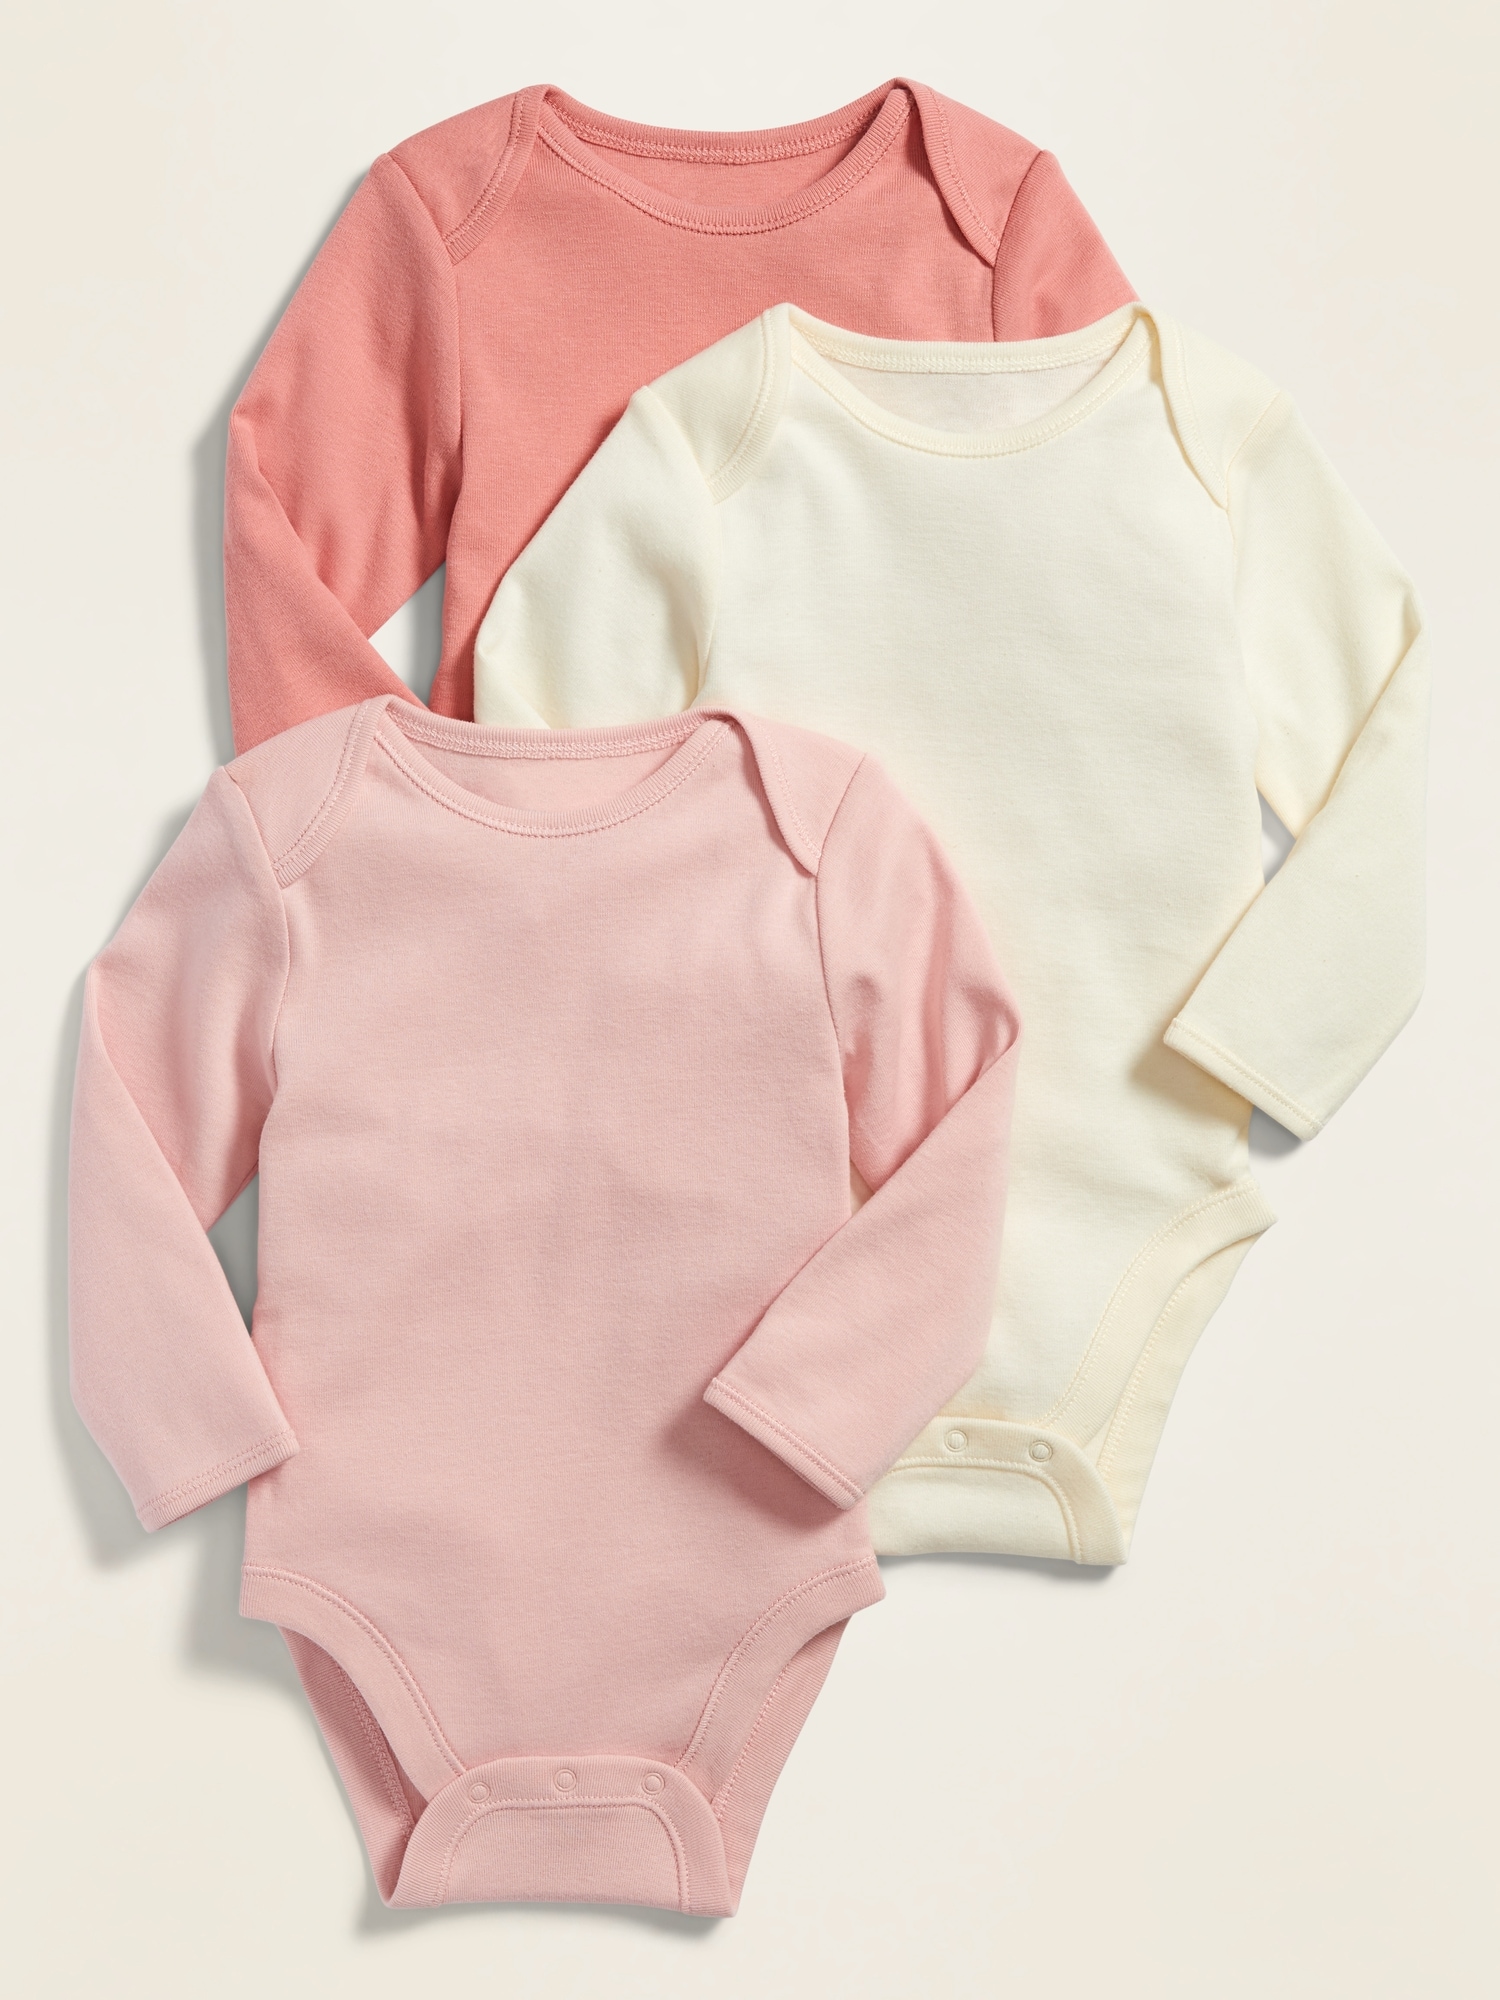 Care Unisex Baby Long Sleeve Cotton Bodysuit Pack of 3